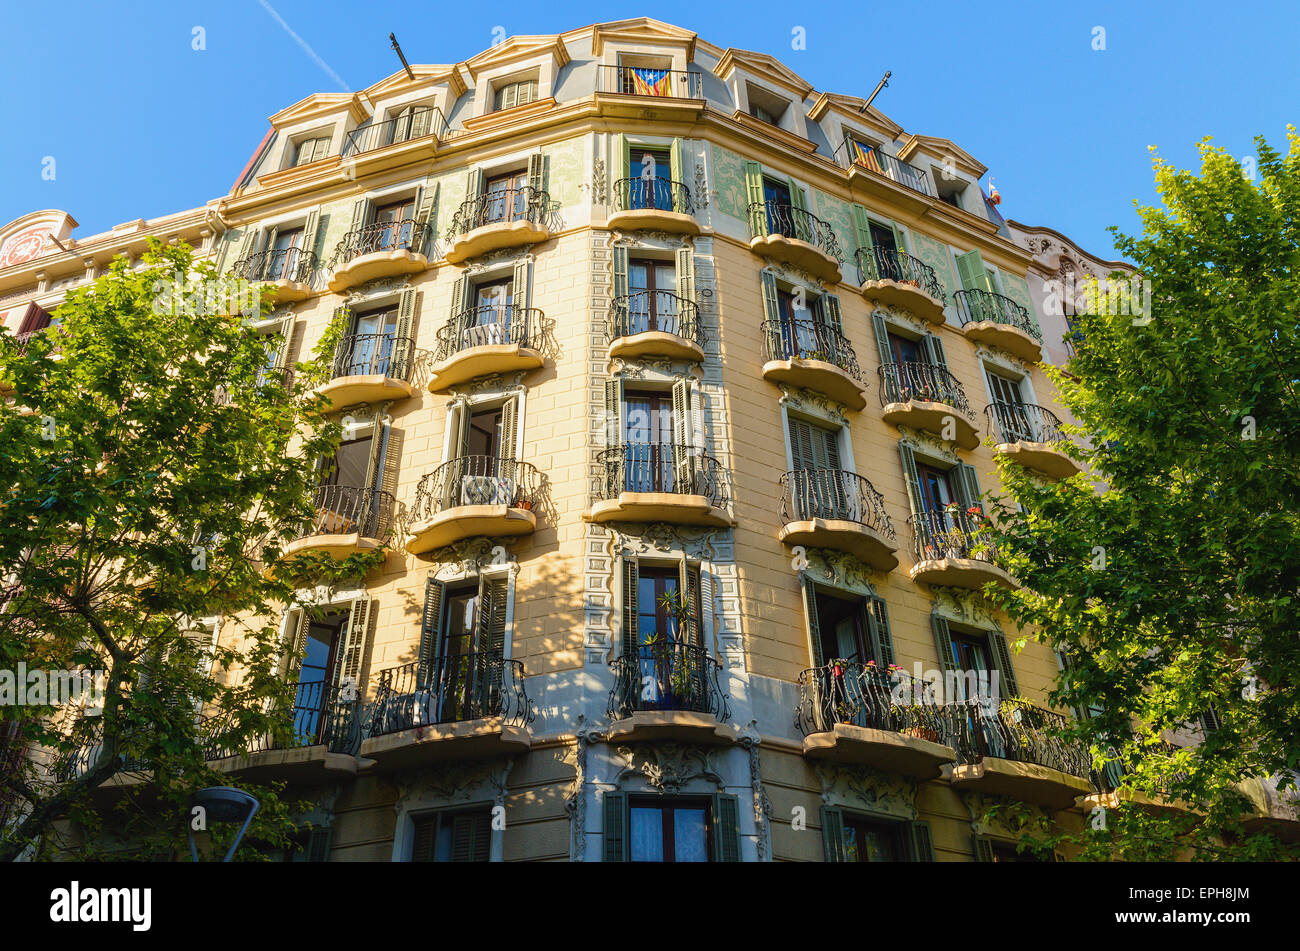 Facade of typical residential building in Eixample district, Barcelona ...